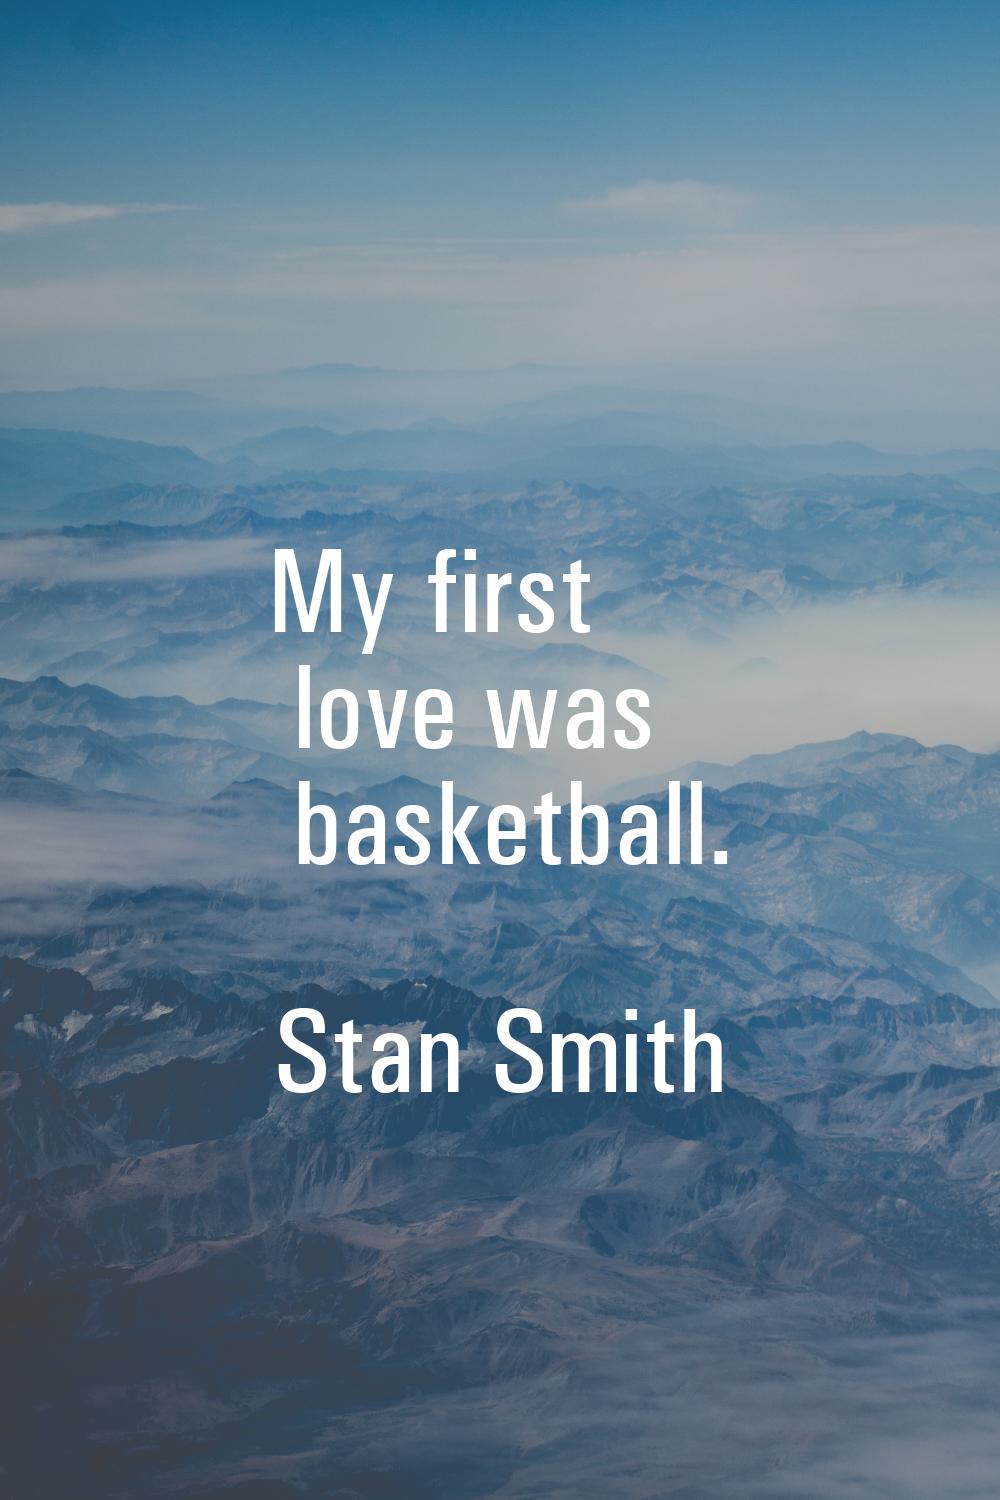 My first love was basketball.